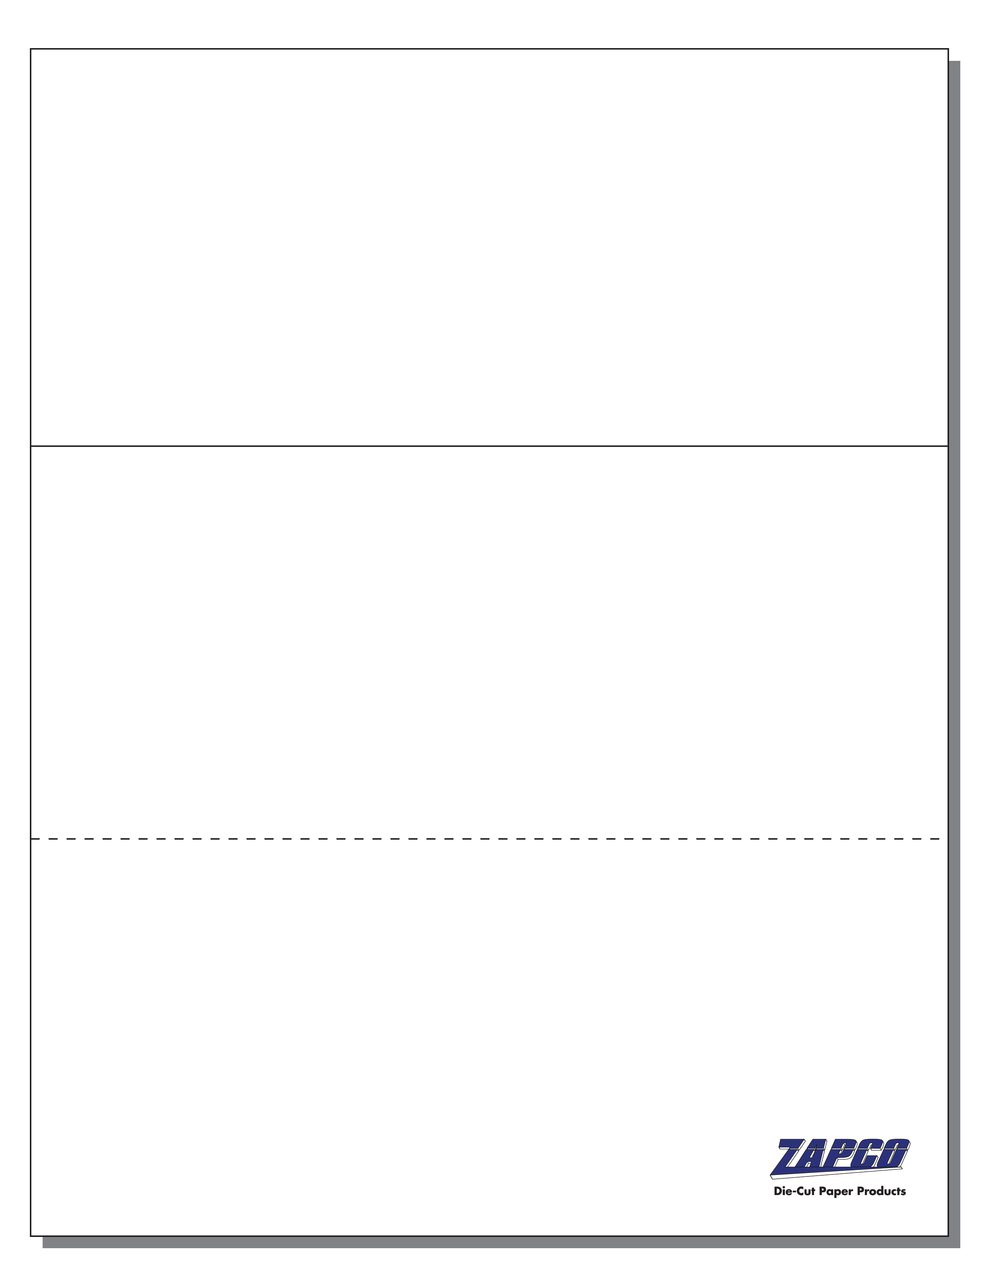 Item 111: 1-Up 3 3/4" x 8 1/2" Mailer with Post Card 8 1/2" x 11" Sheet(250 Sheets)